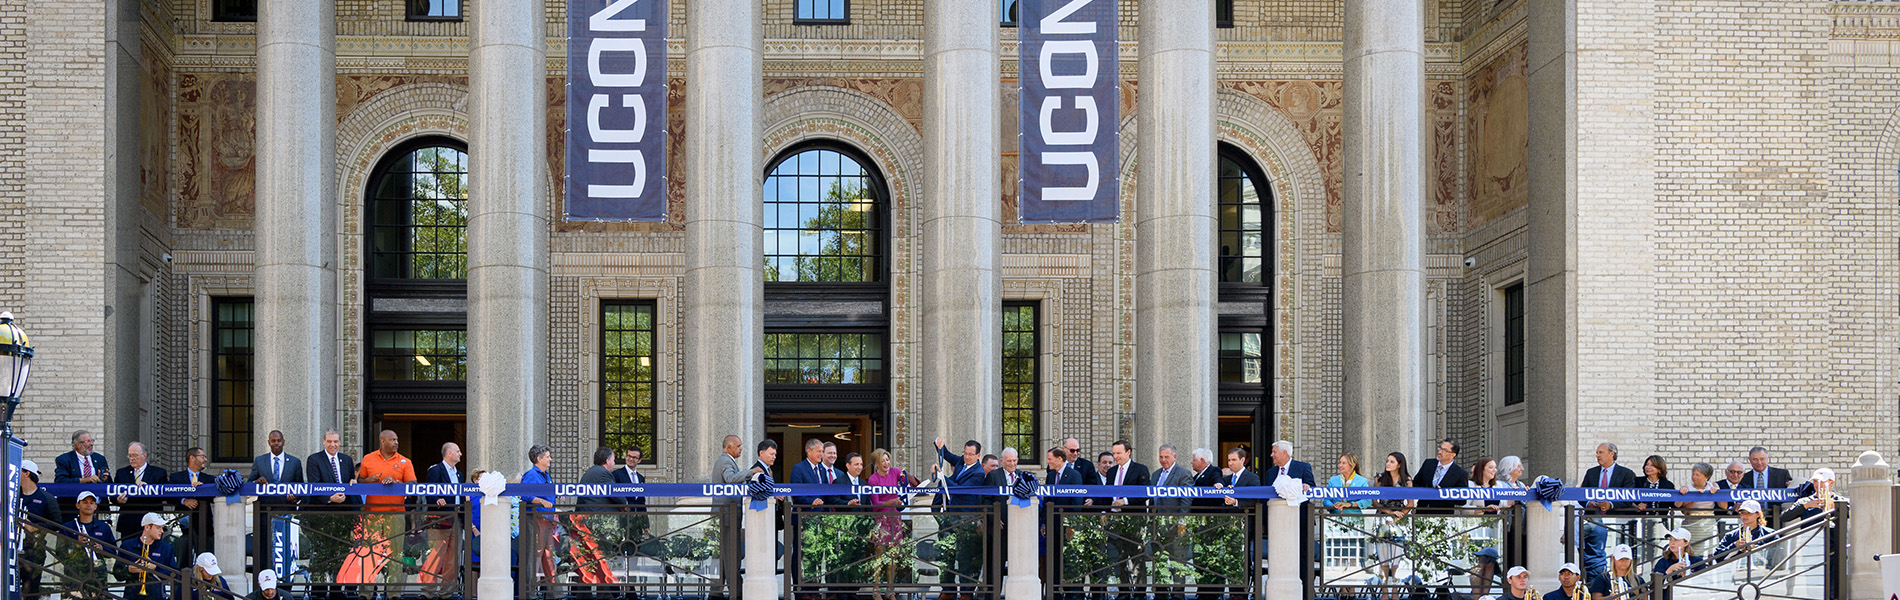 Governor Dannel Malloy, President Susan Herbst and other dignitaries cut the ribbon to open the Hartford campus on Aug. 23, 2017. (Peter Morenus/UConn Photo)